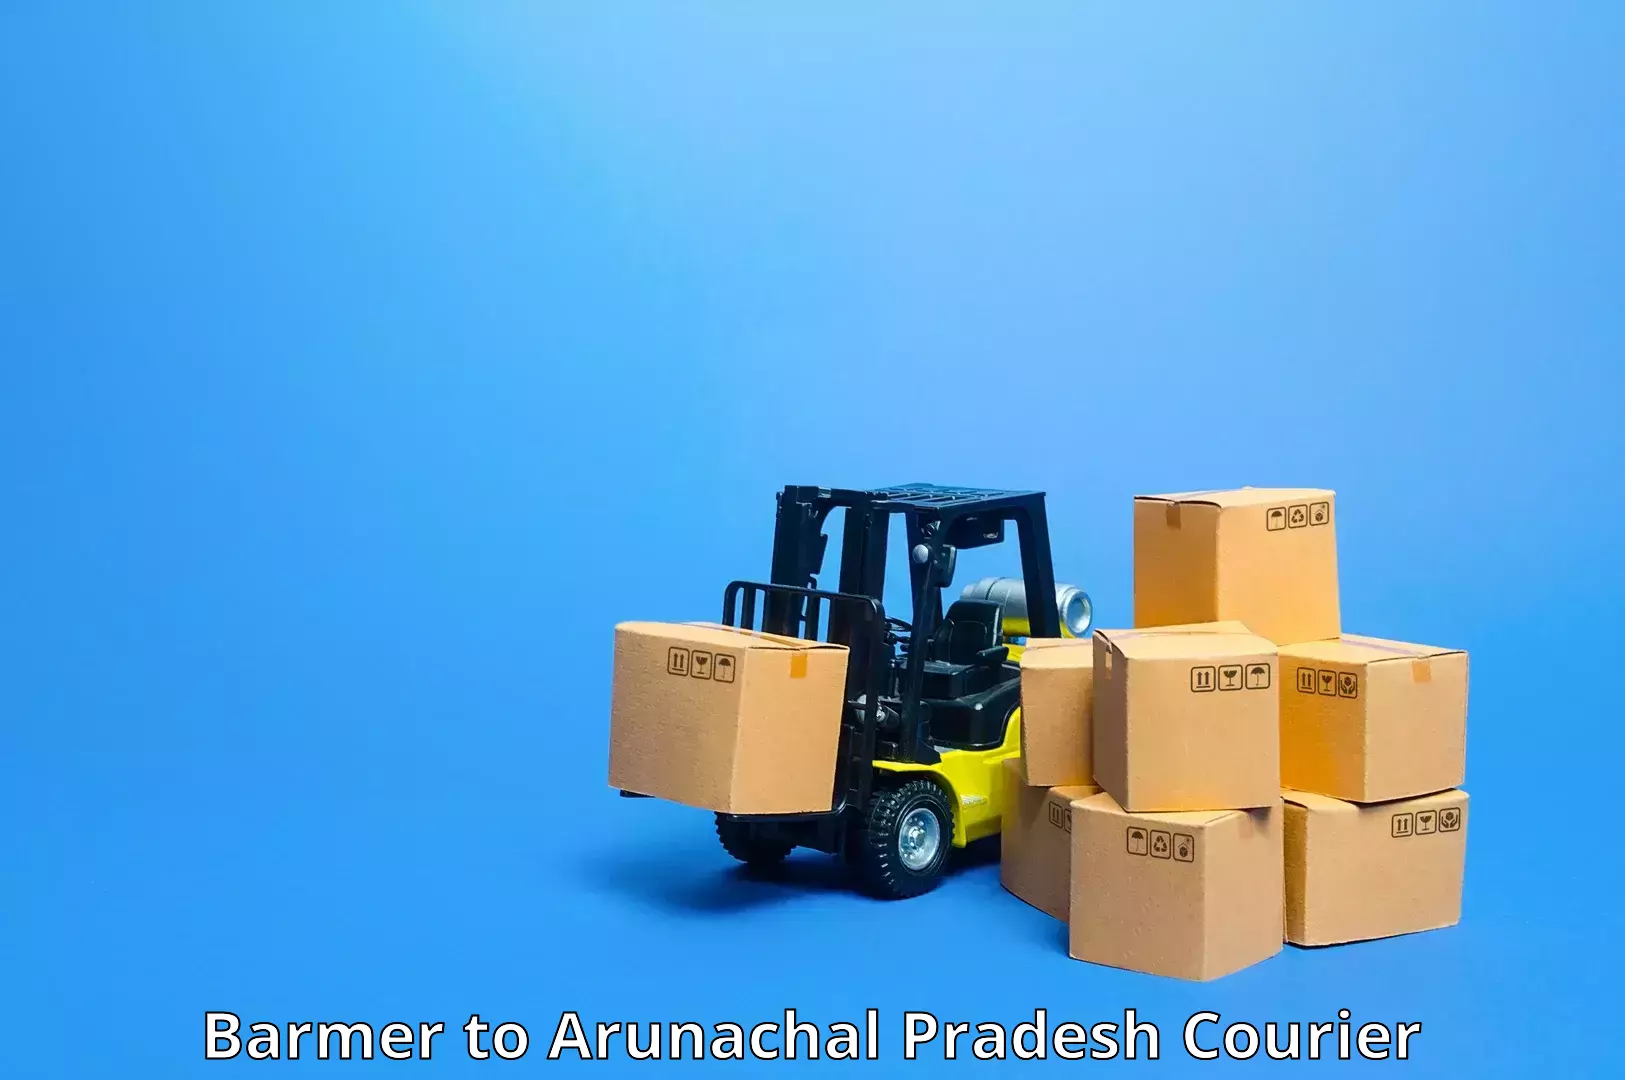 Pharmaceutical courier Barmer to Deomali